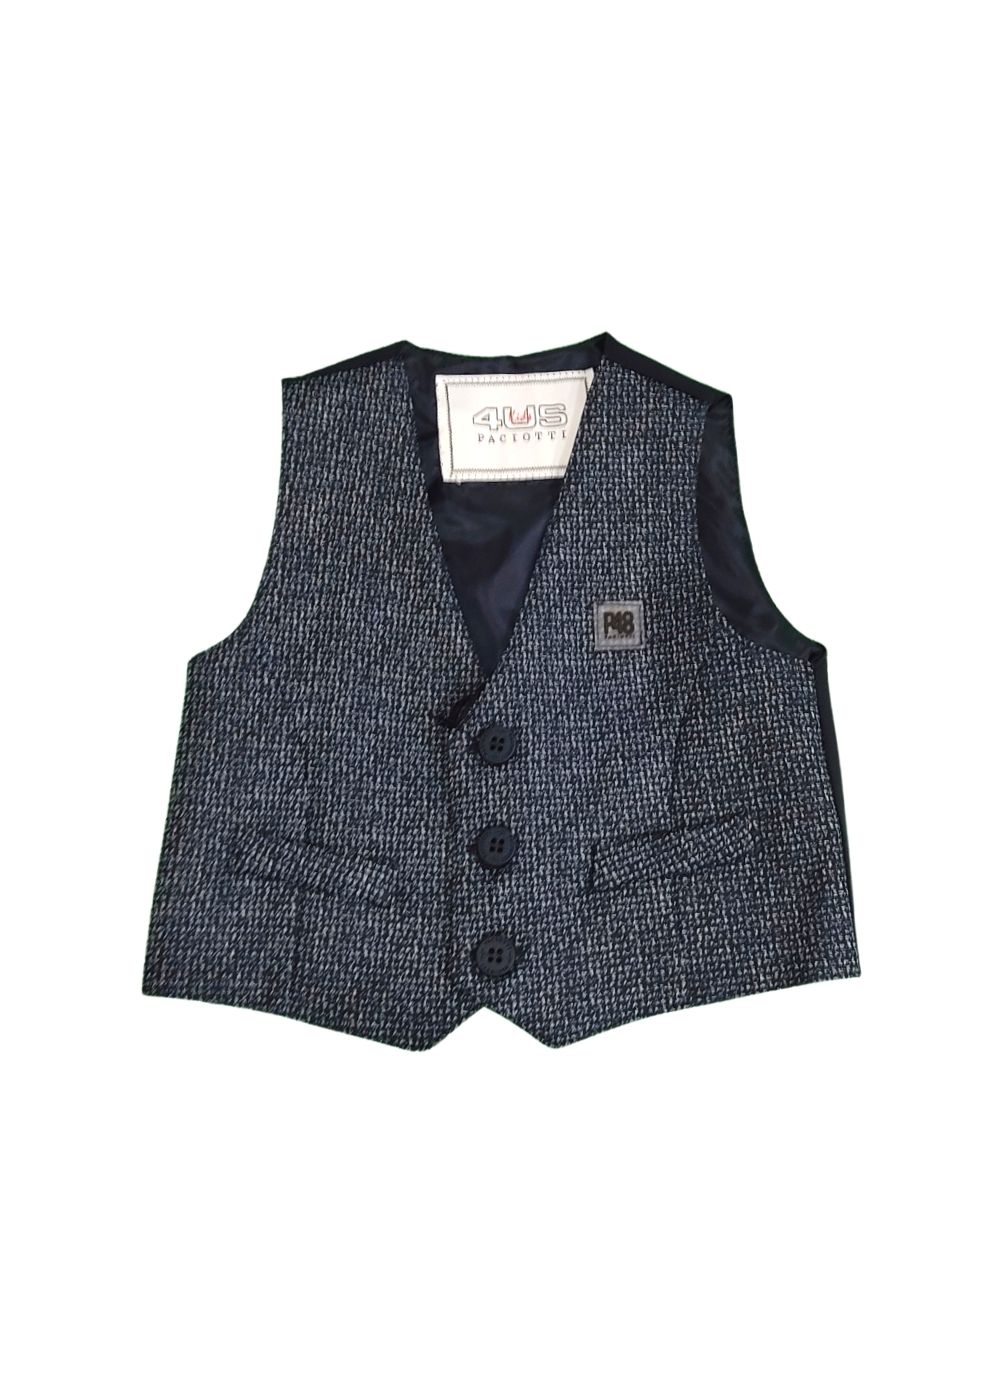 Featured image for “PACIOTTI 4US GILET IN PUNTO MILANO”